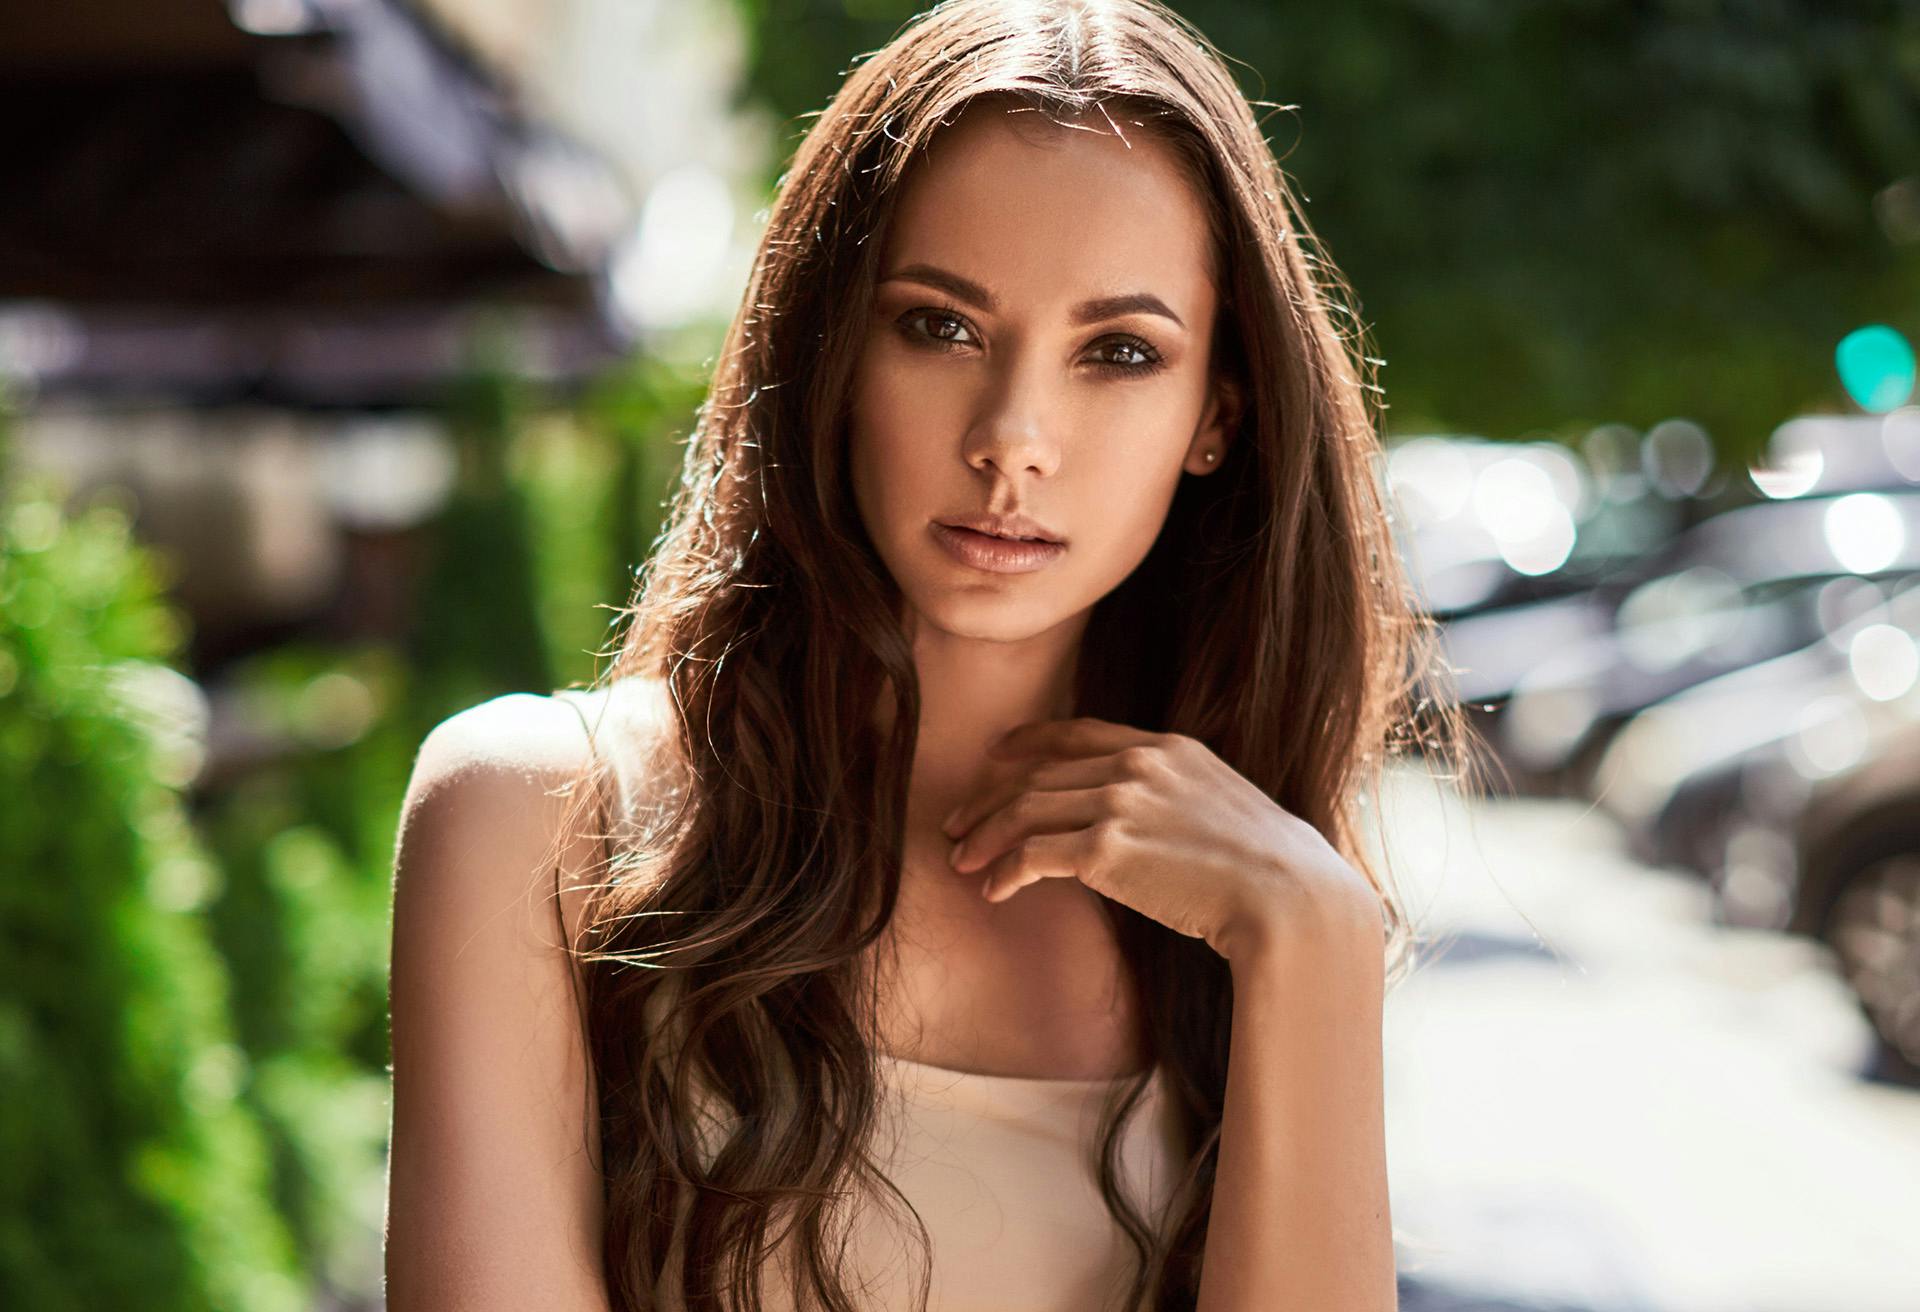 Woman with long brown hair and a full face of makeup outside